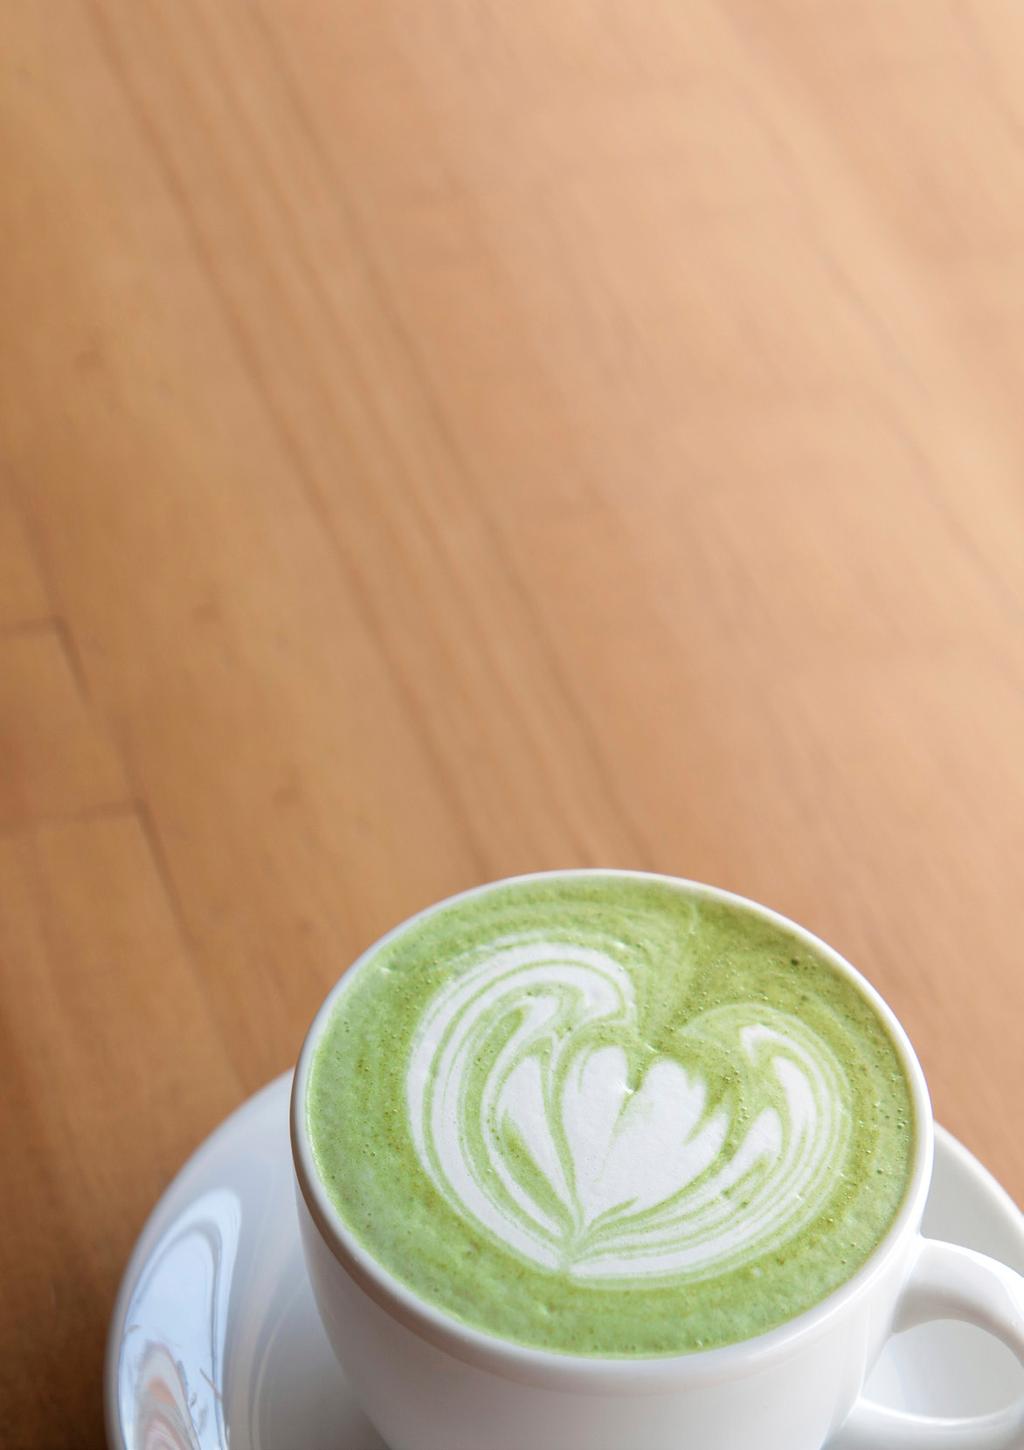 Matcha Latte Matcha tea has been drunk in Japan as part of the tea ceremony for almost 900 years, and Buddhist monks would drink Matcha tea to keep them alert, awake and focused during long, silent